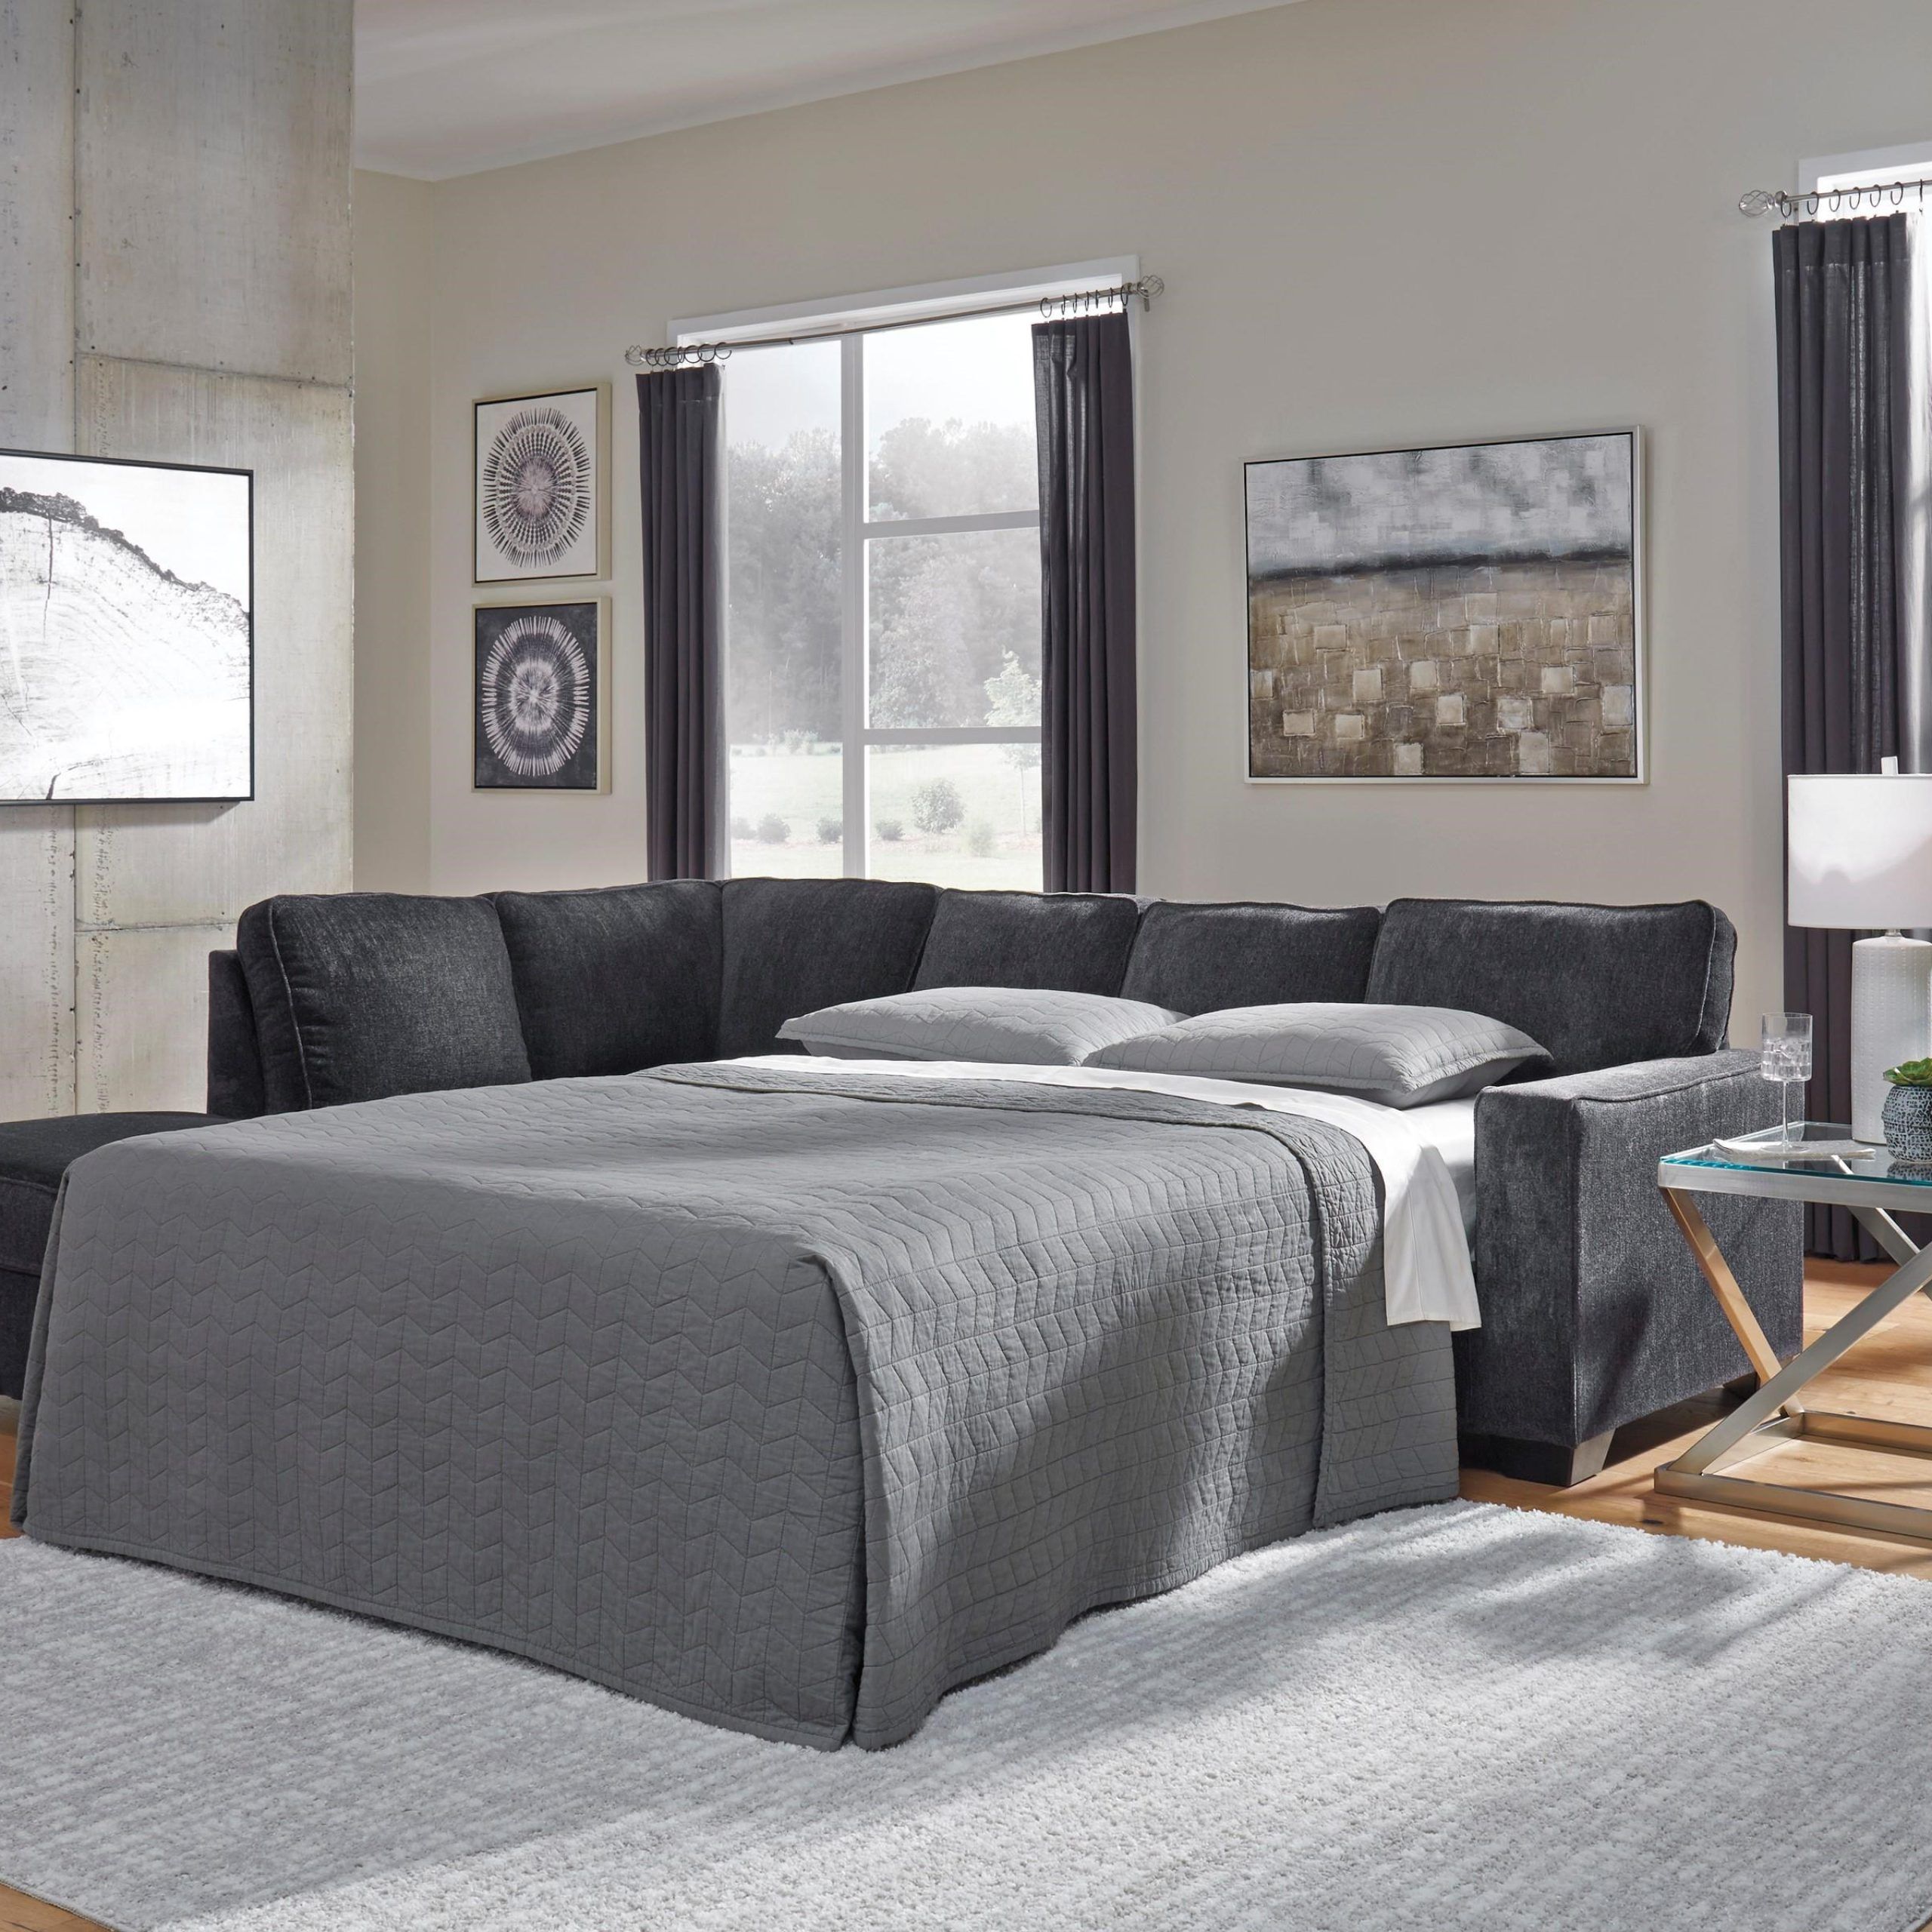 Popular Signature Designashley Altari 805372163 2 Piece Left Arm Facing Intended For Left Or Right Facing Sleeper Sectionals (View 3 of 15)